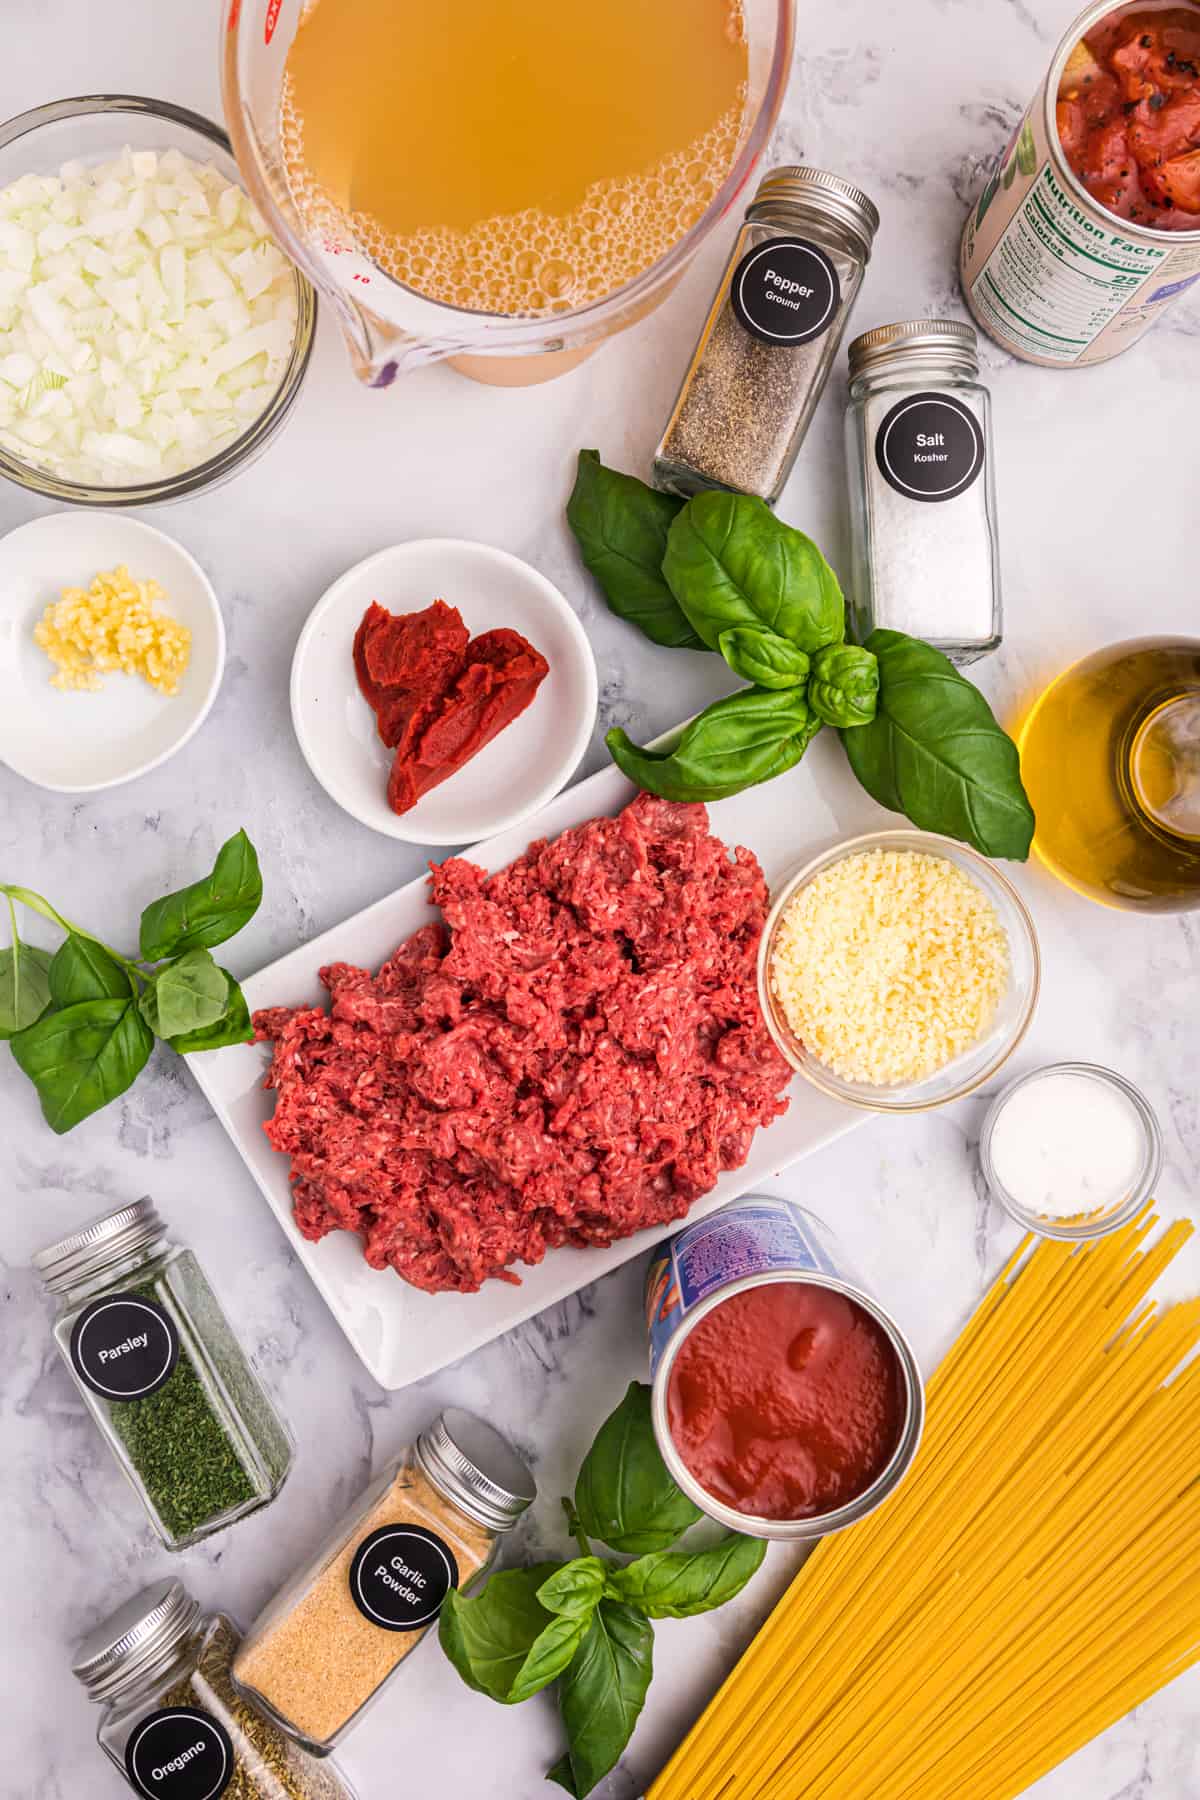 The ingredients for spaghetti and meatball stew are presented on a white surface.